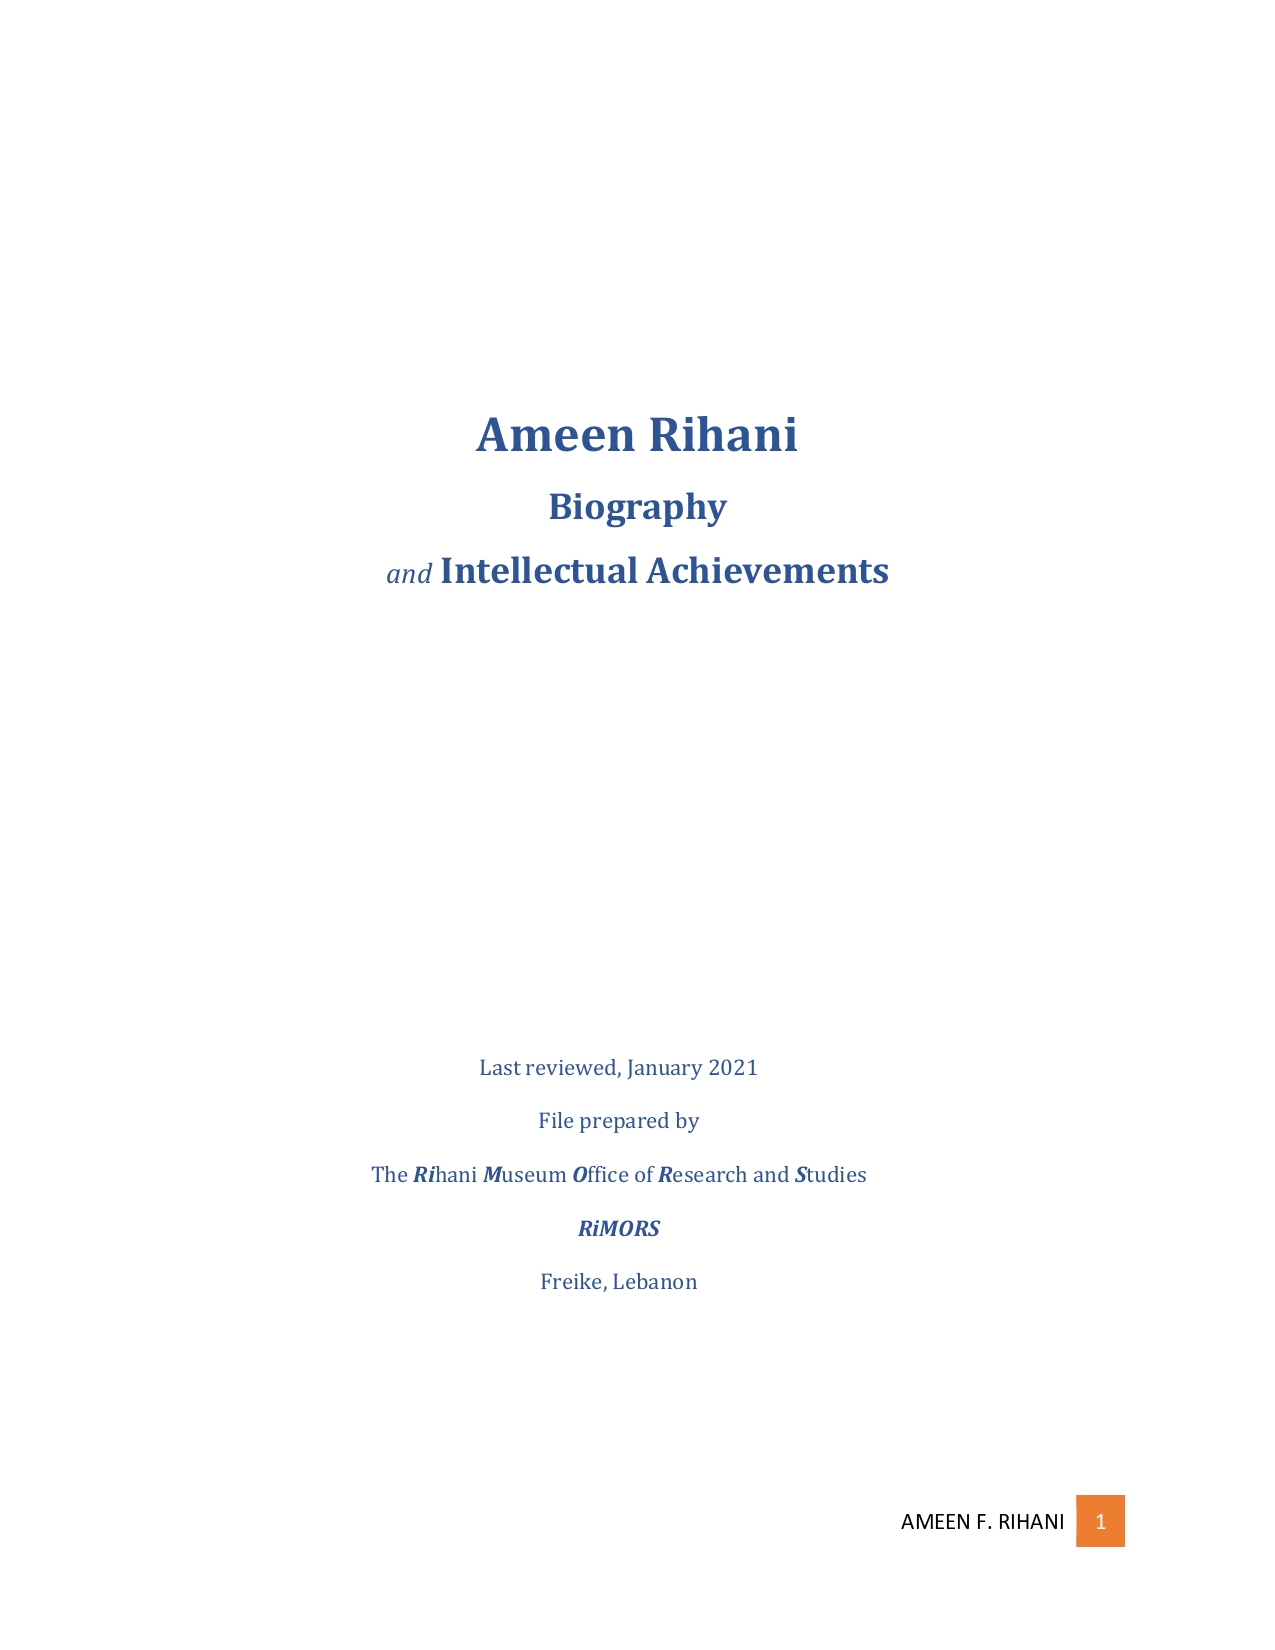 Ameen Rihani: Biography and Intellectual Achievements, Freike, Lebanon: The Rihani Museum Office of Research and Studies (RiMORS), 2021.